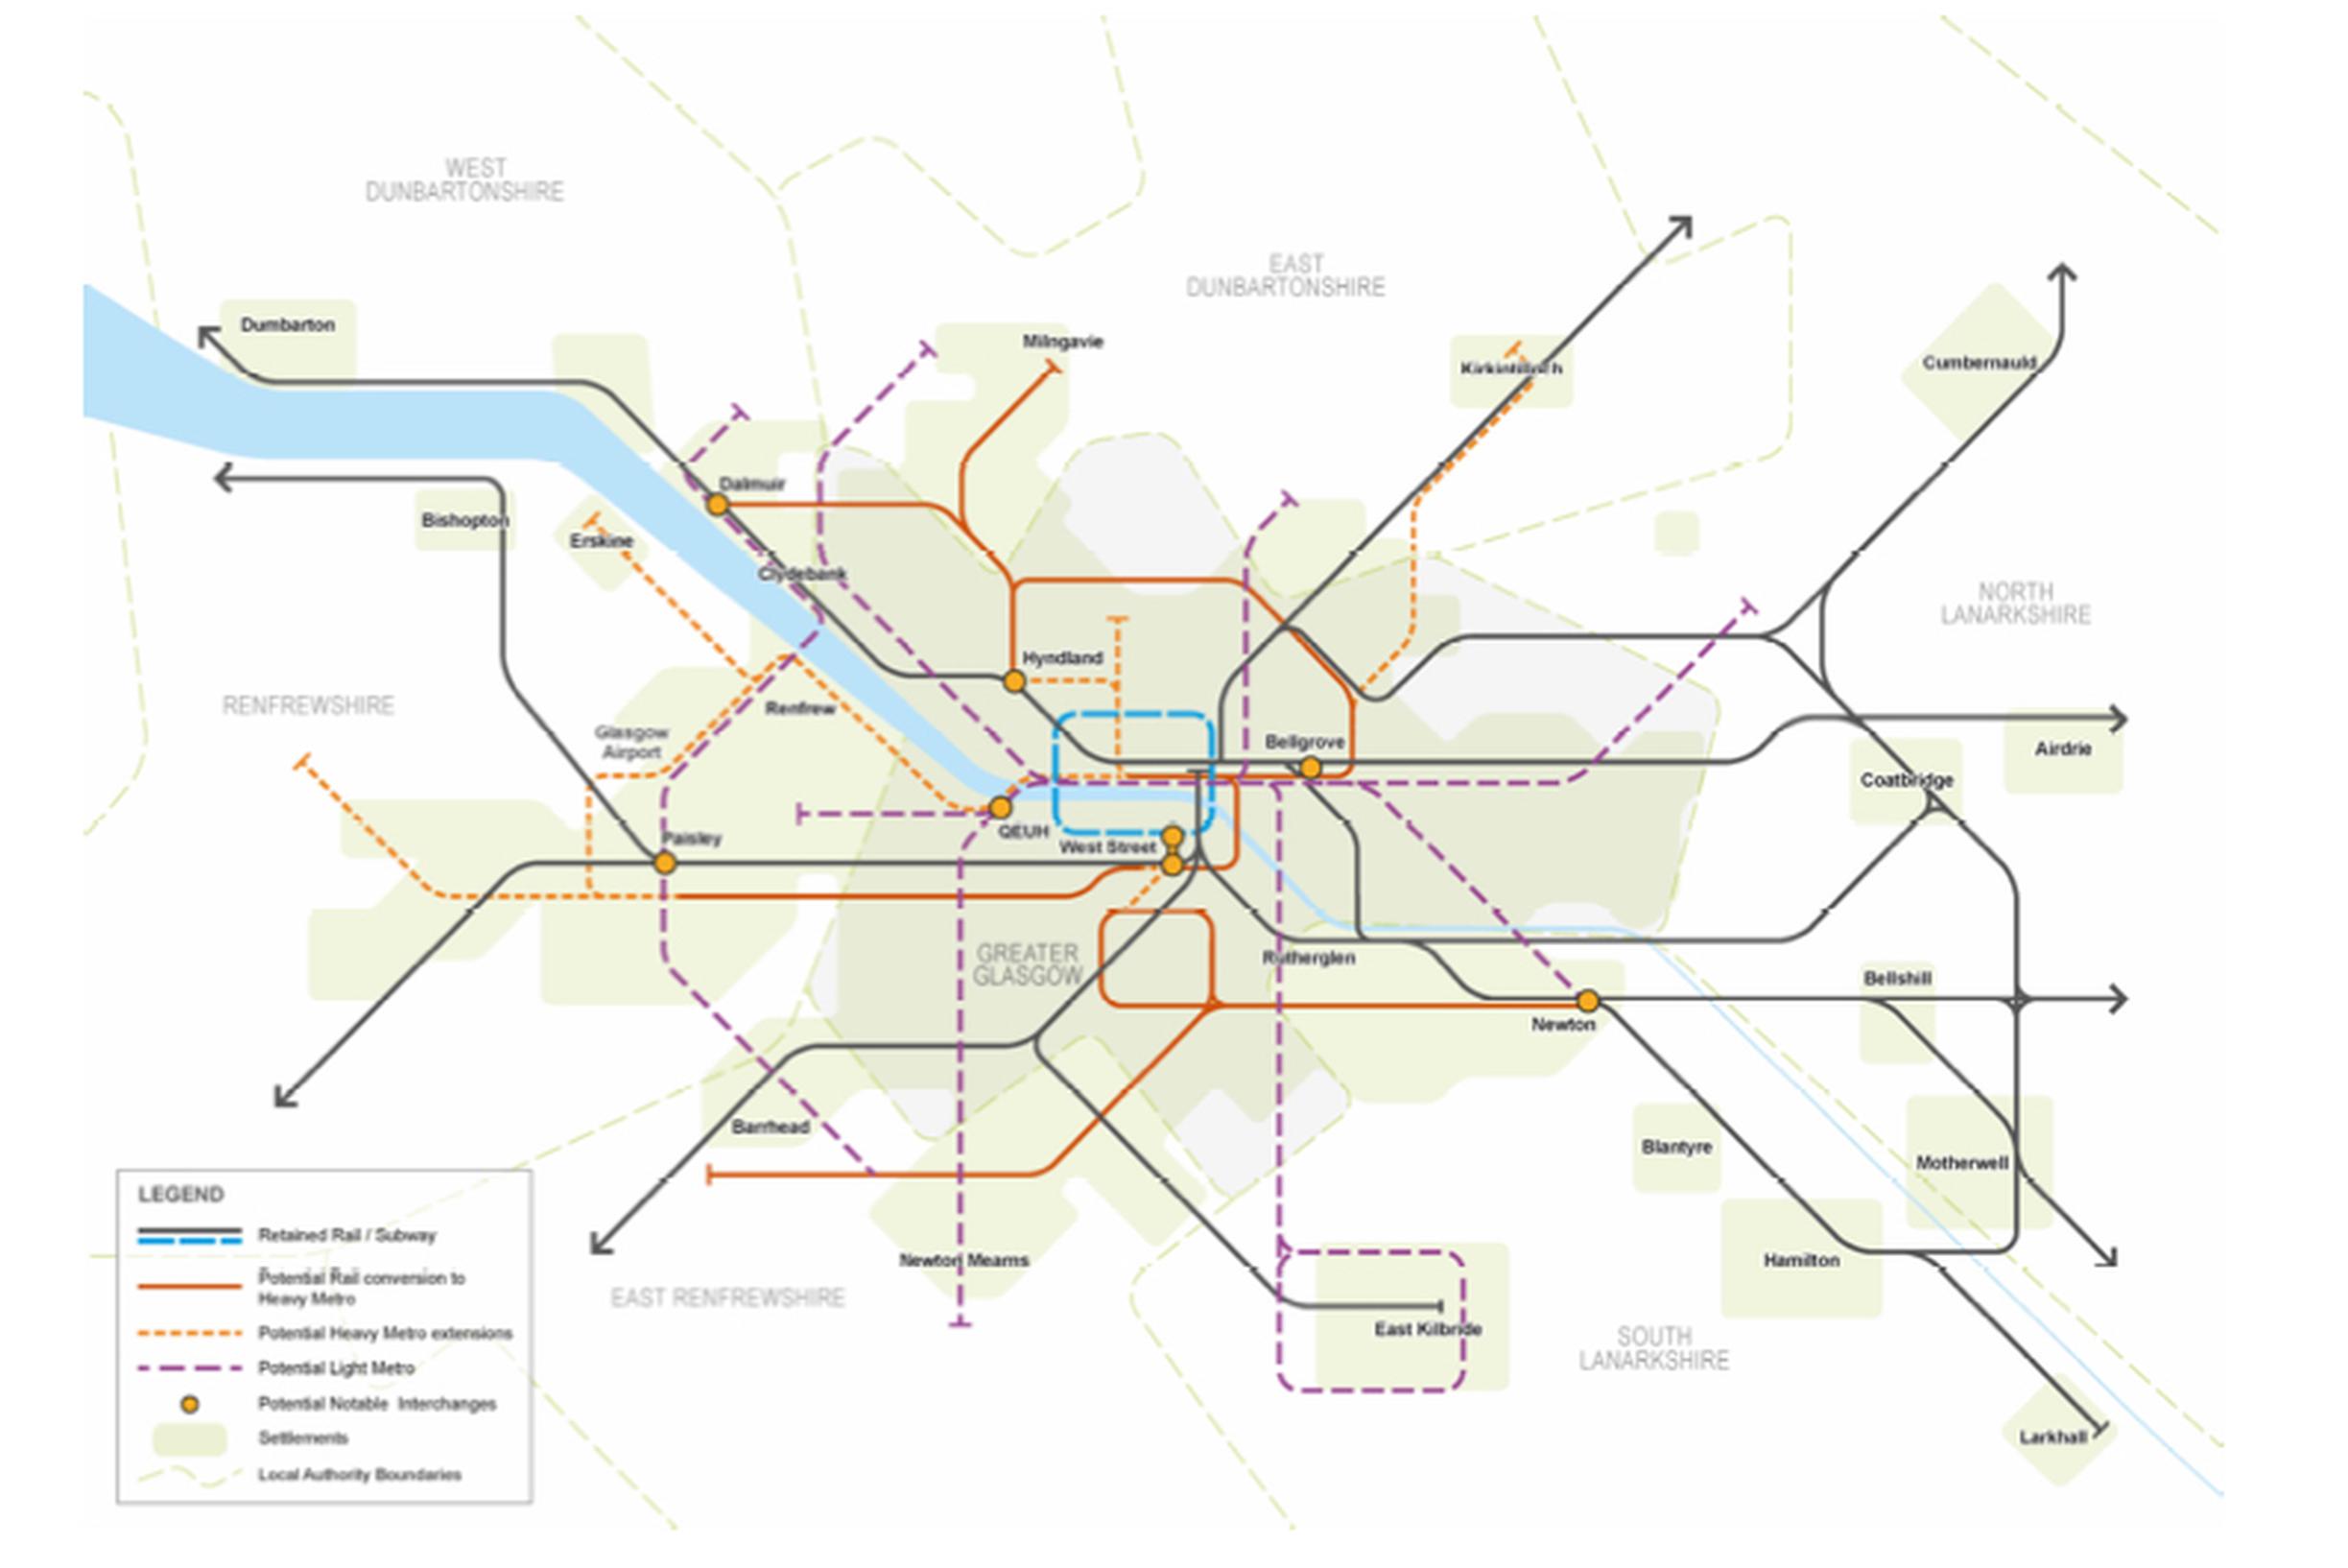 The Clyde Metro, which represents a multi-billion investment over 30 years, would “address the gap in public transport provision” in the Glasgow City region